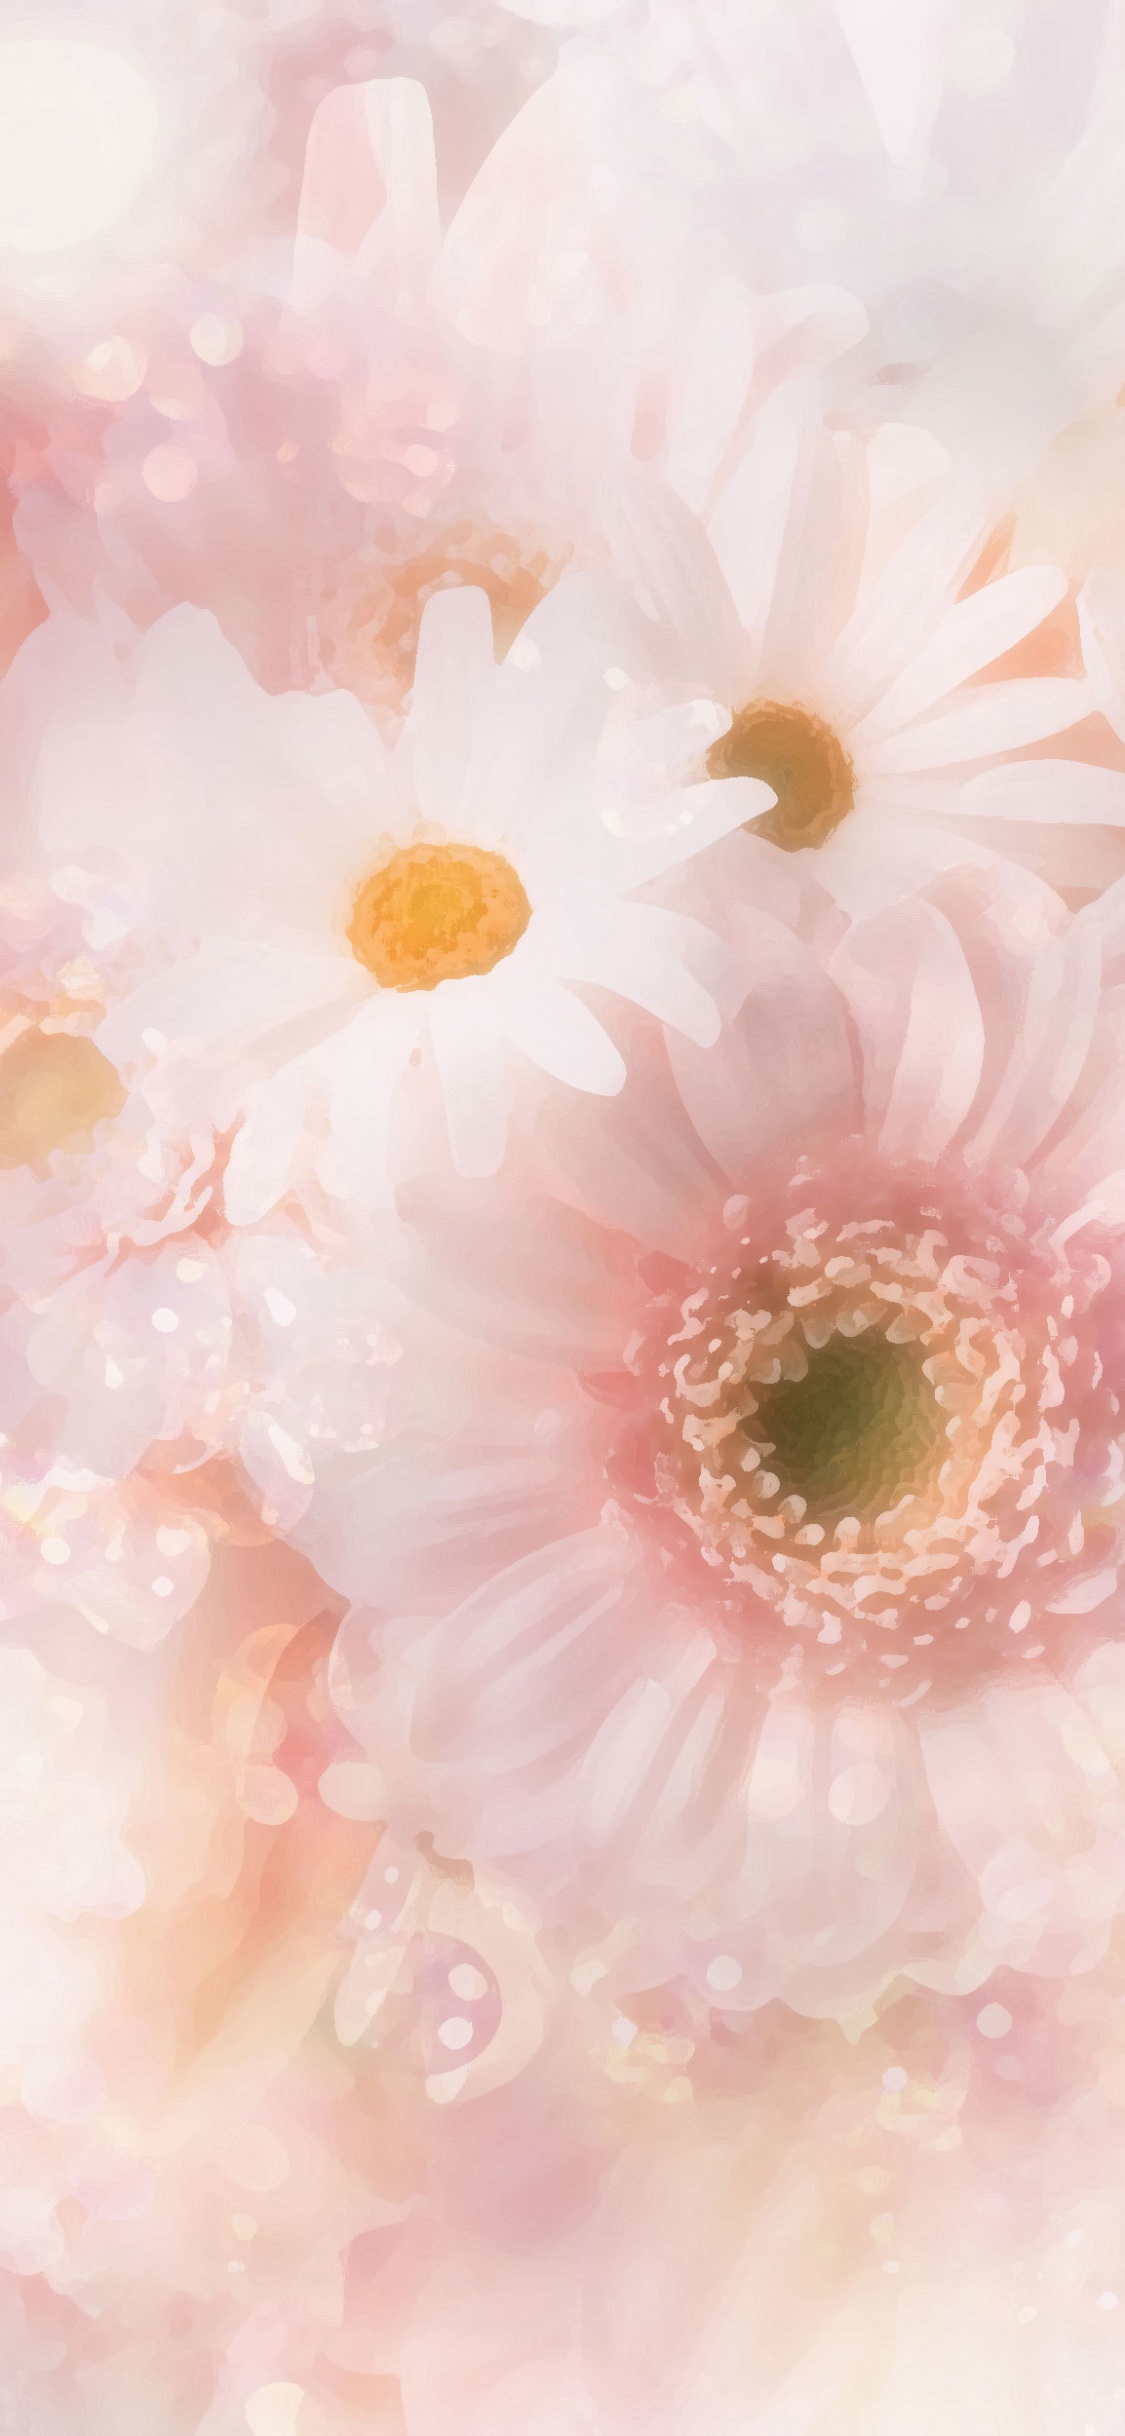 White and Pink Daisy Flower. Wallpaper in 1125x2436 Resolution